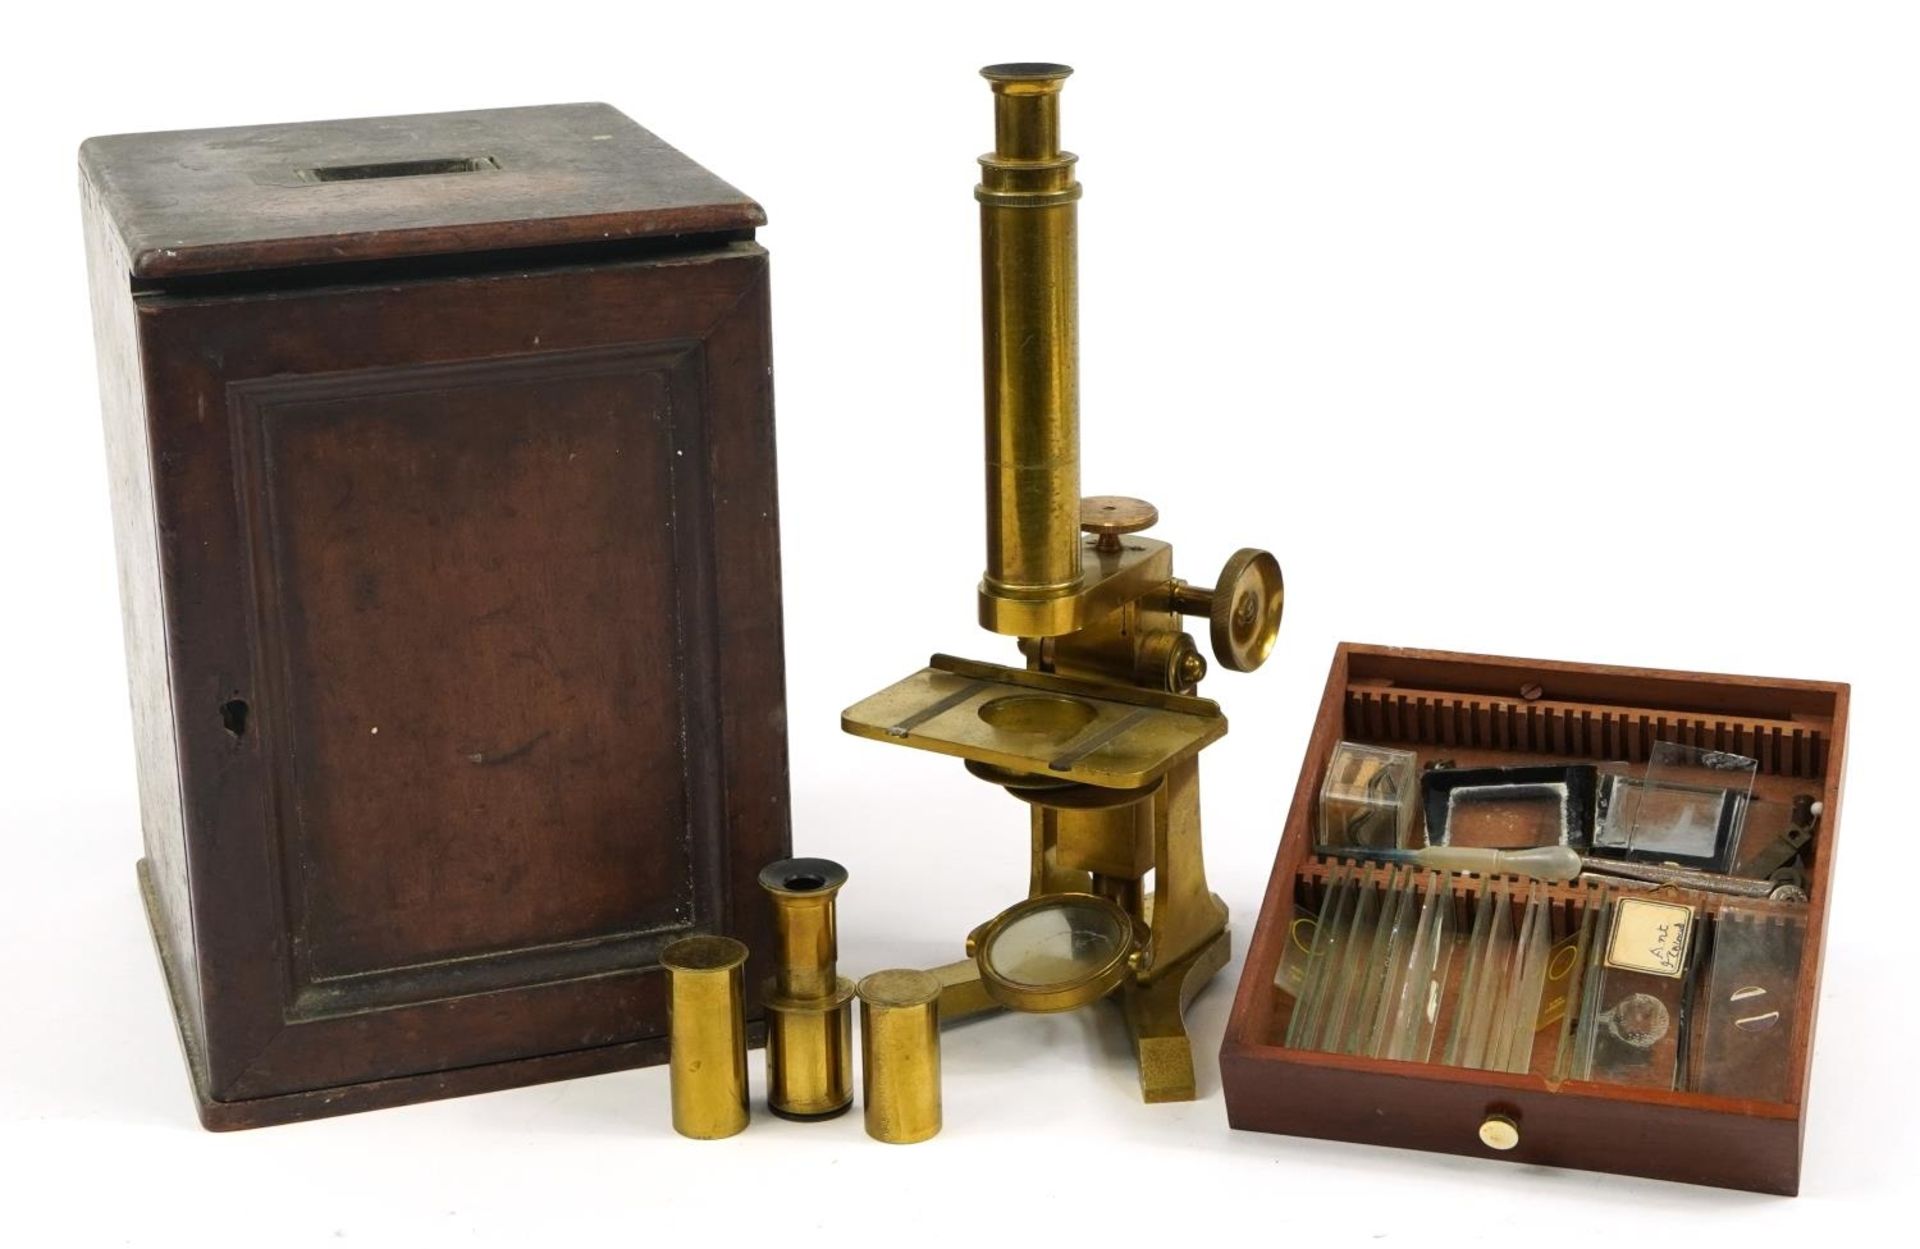 Moritz Pillischer of London, early 19th century brass compound monocular microscope with mahogany